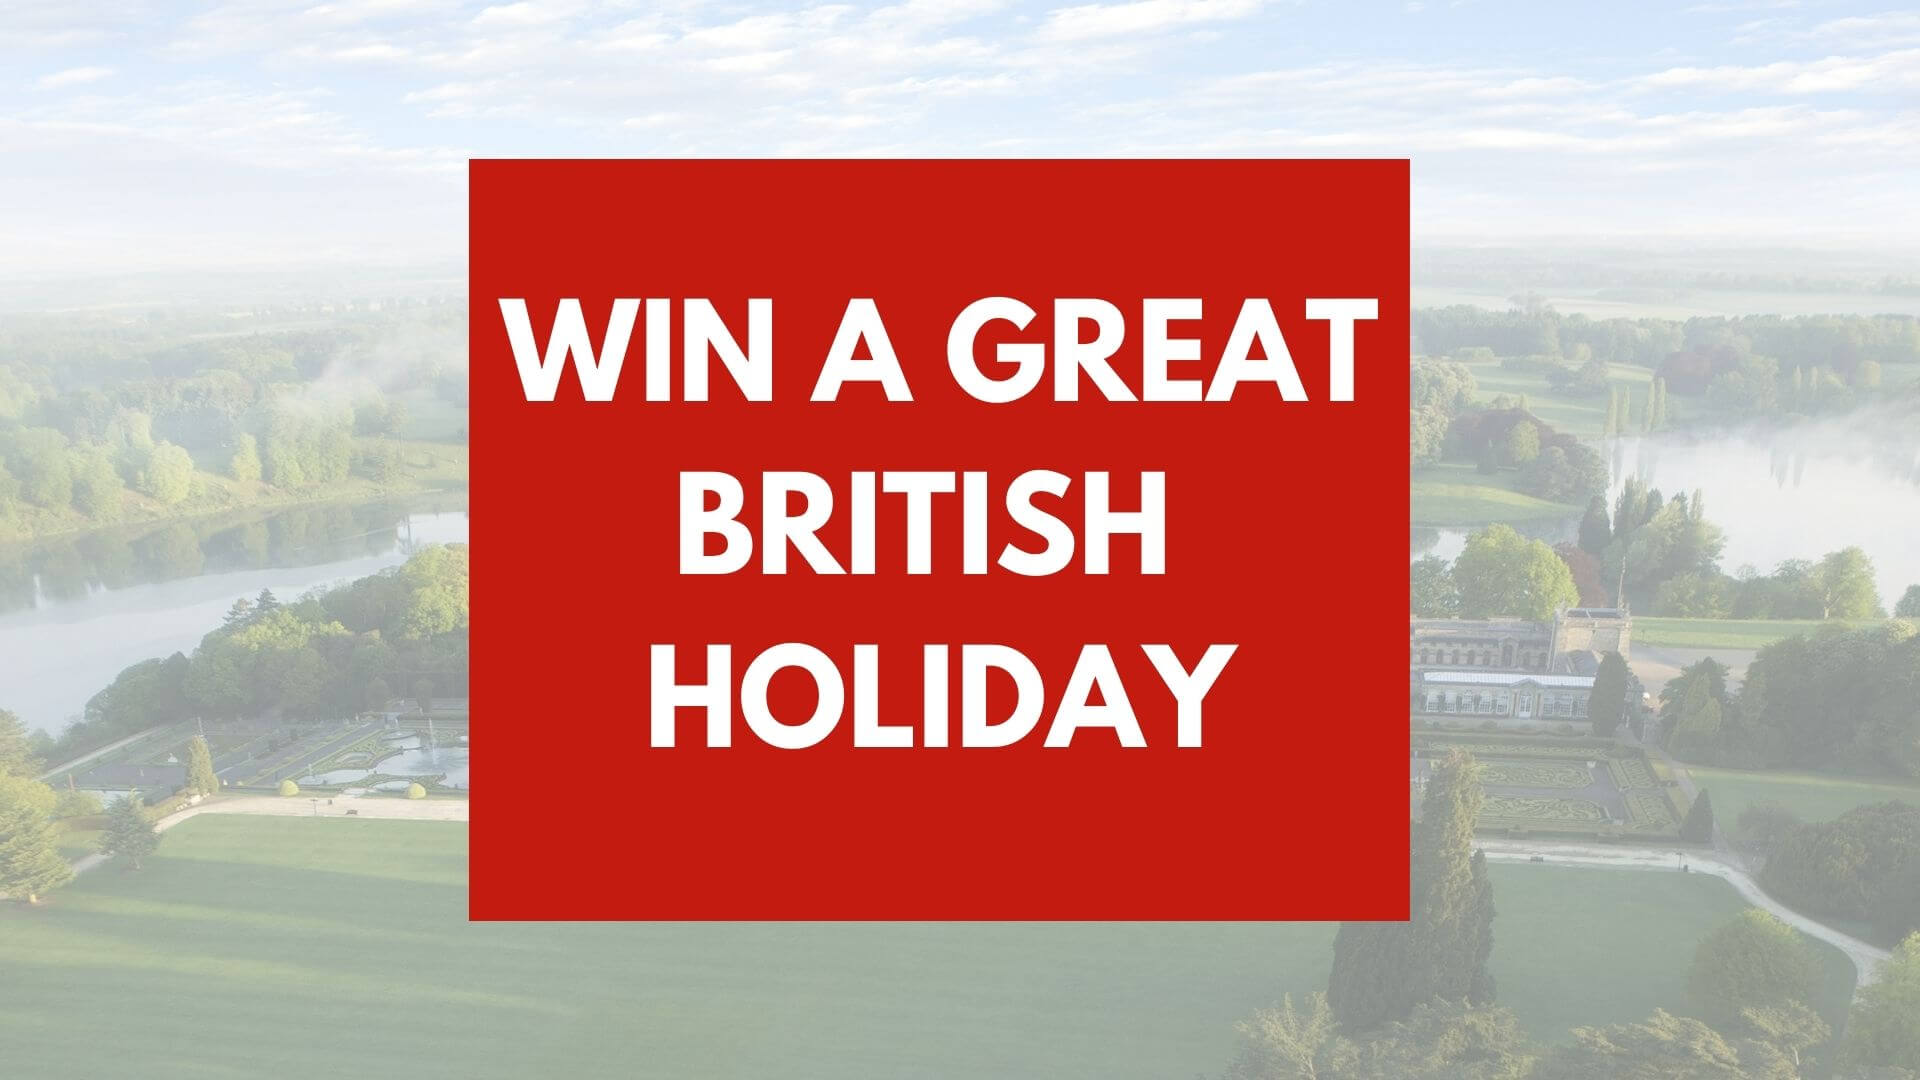 Win a luxury holiday in Britain in 2023/24 with Discover Britain